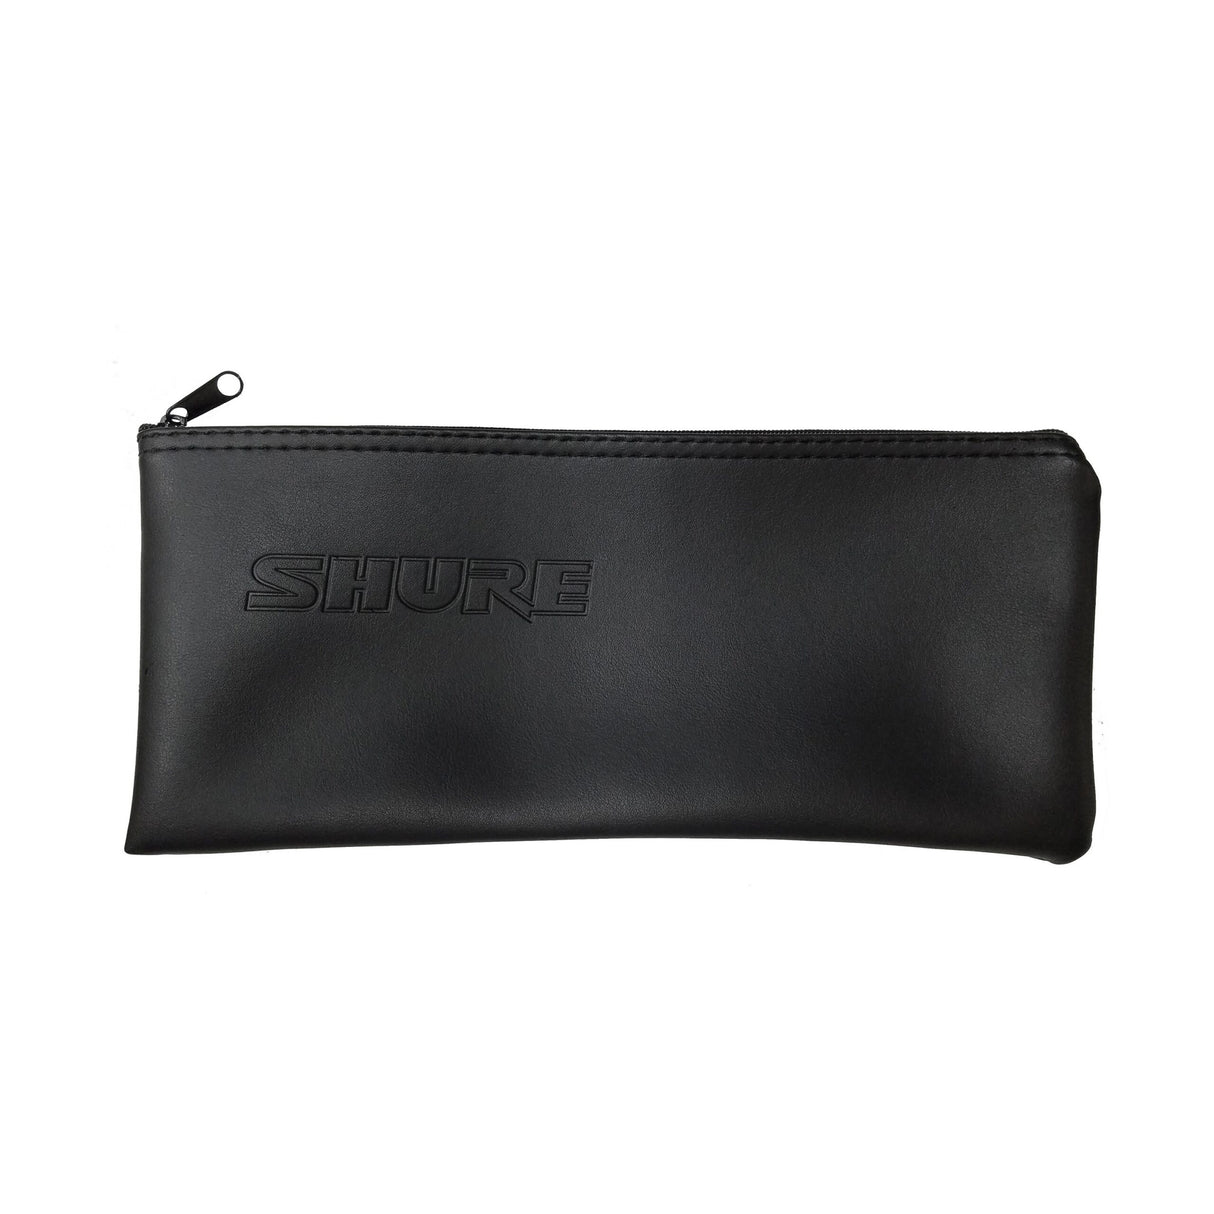 Shure 95A2313 Zippered Vinyl Pouch for Microphones (Used)